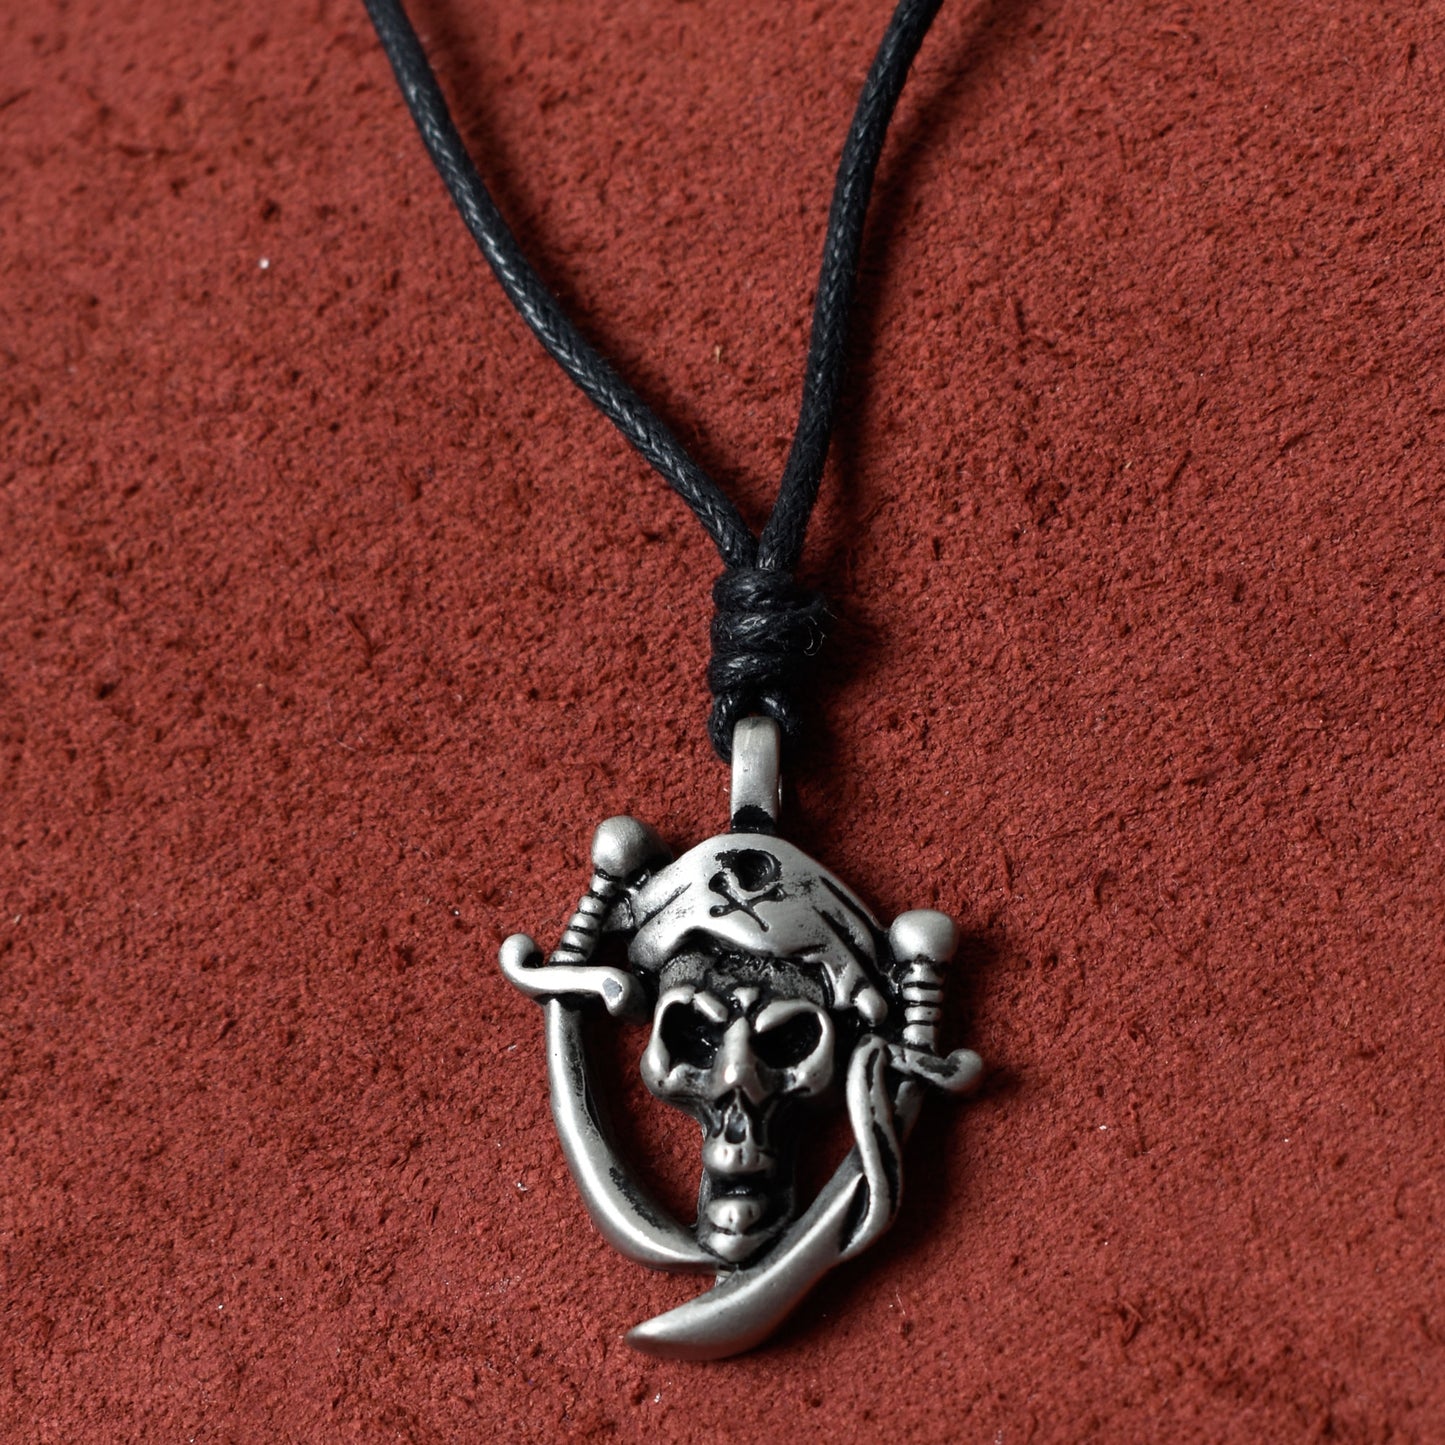 New Pirate Silver Necklace Pendant Jewelry